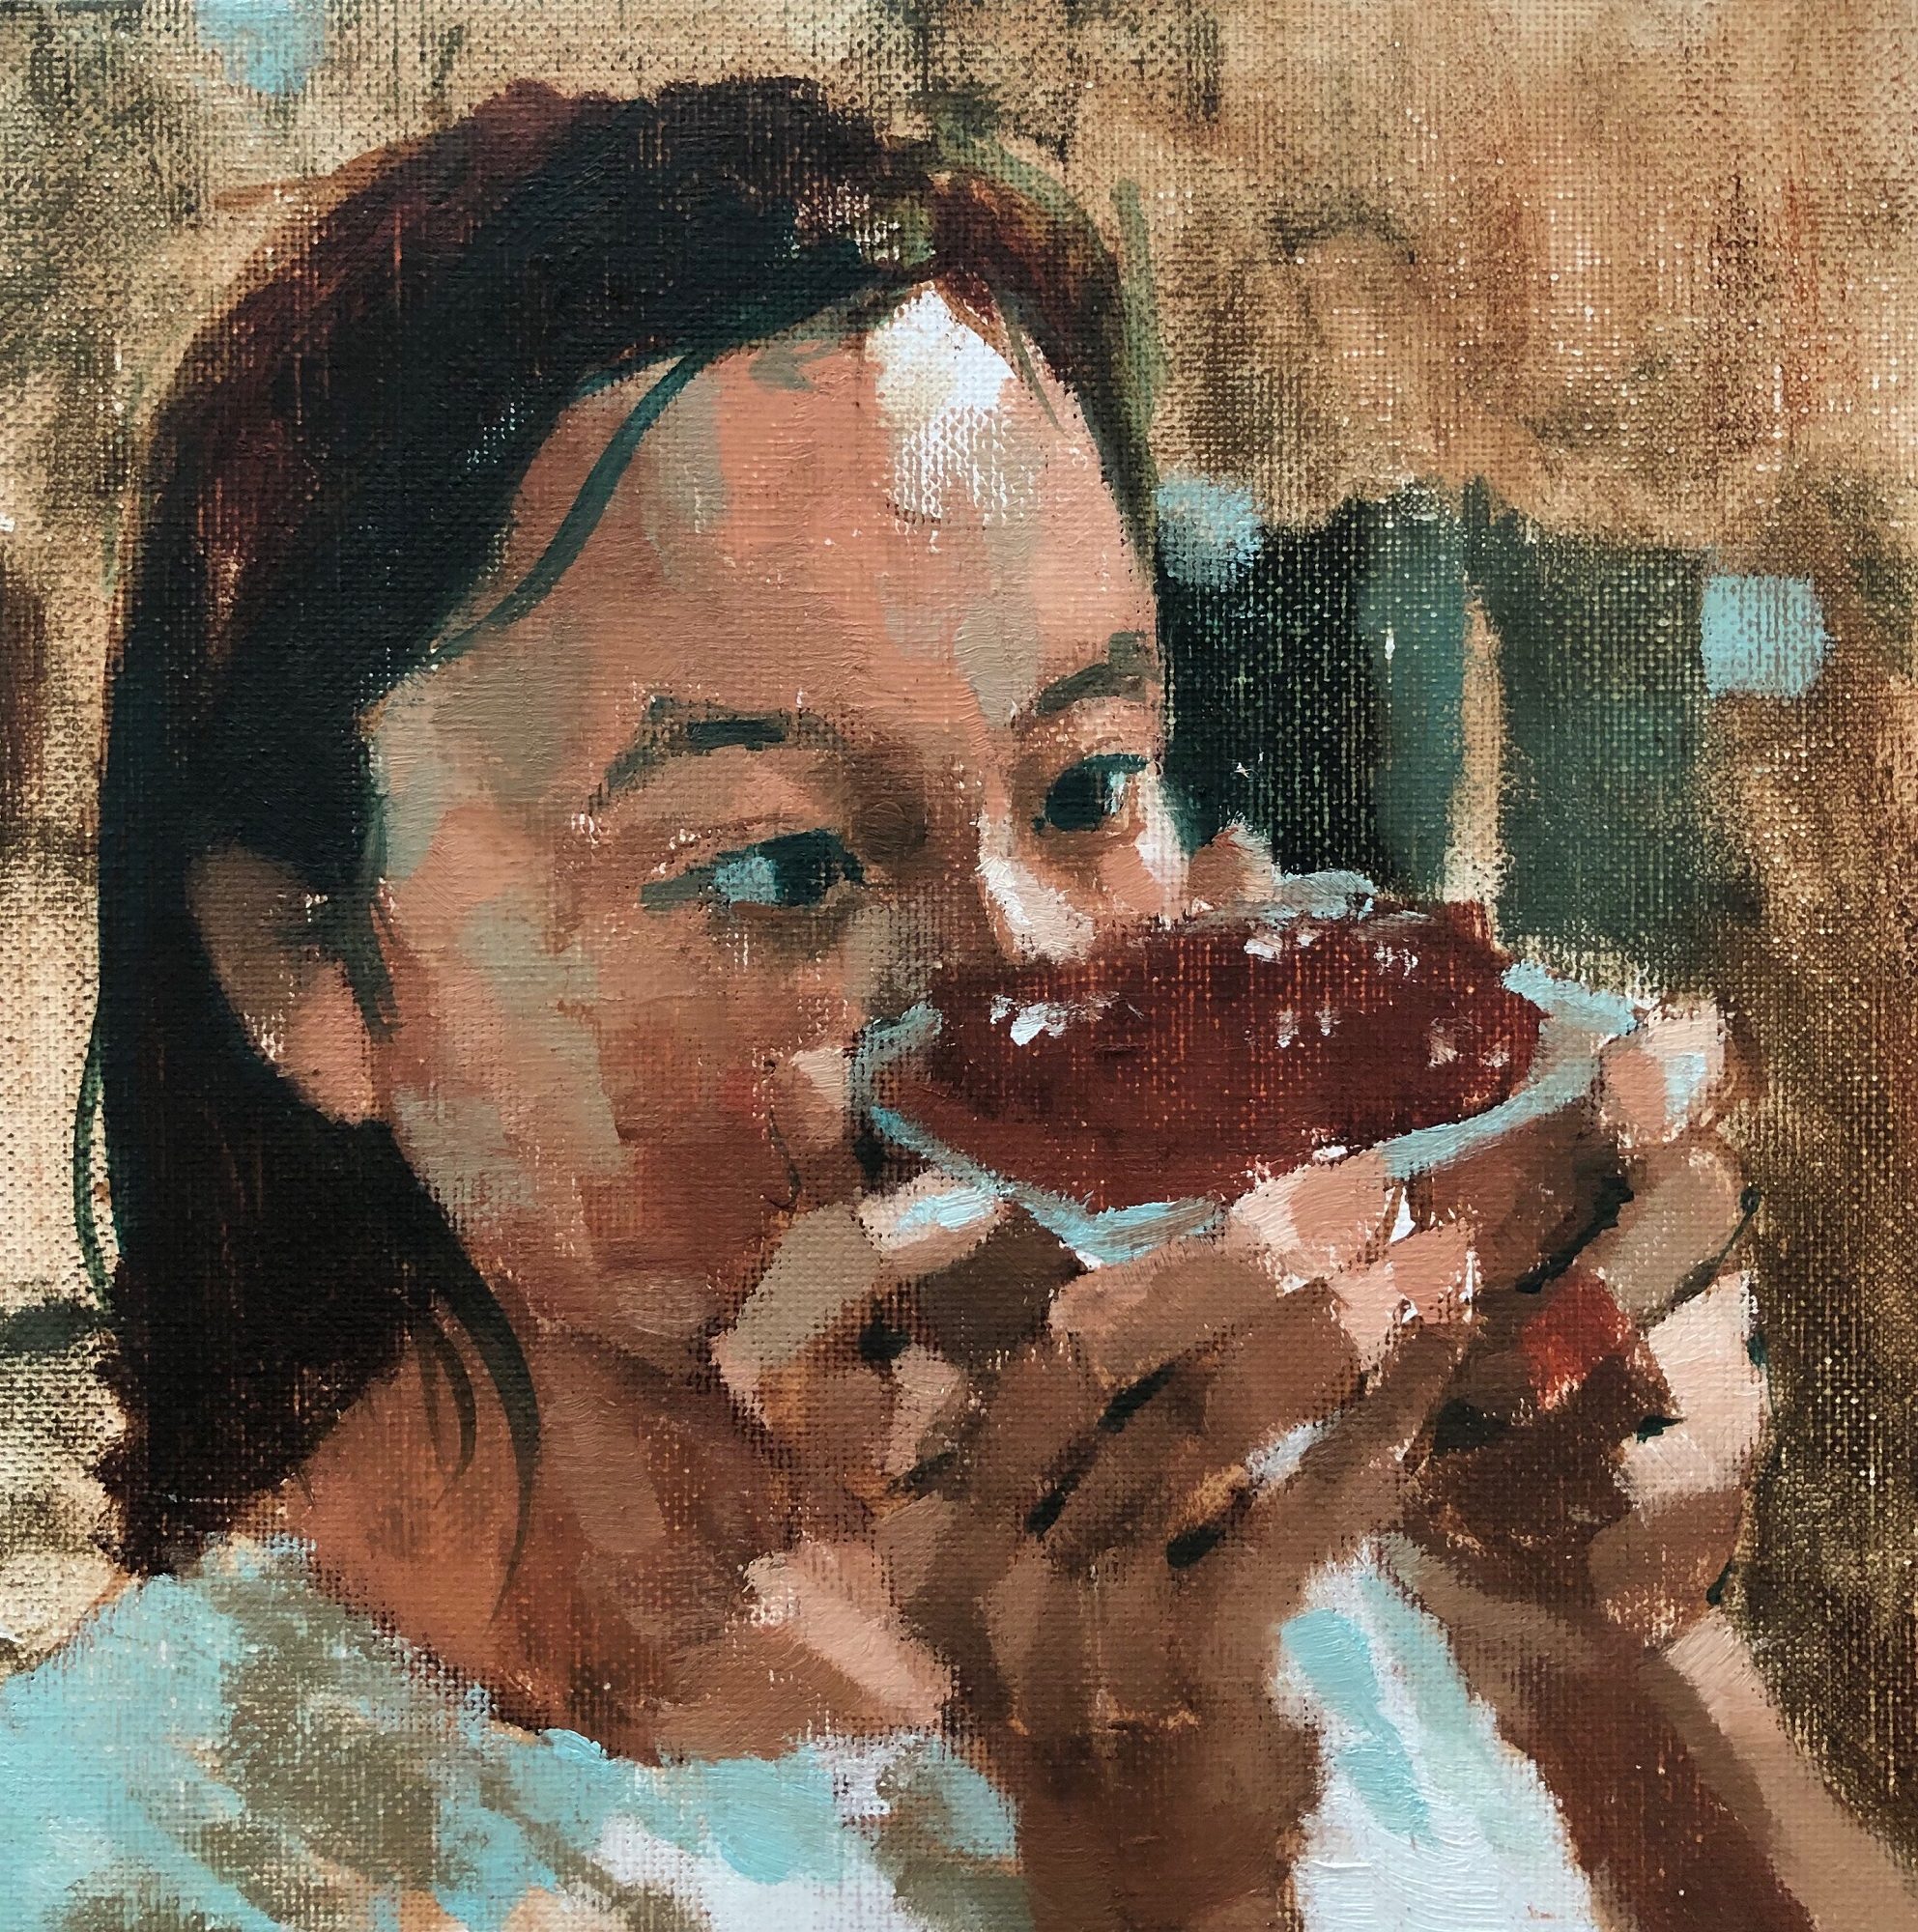 Charlotte with Mooncake, 2019 Jonathan Chan Oil on canvas, 8 x 8 in